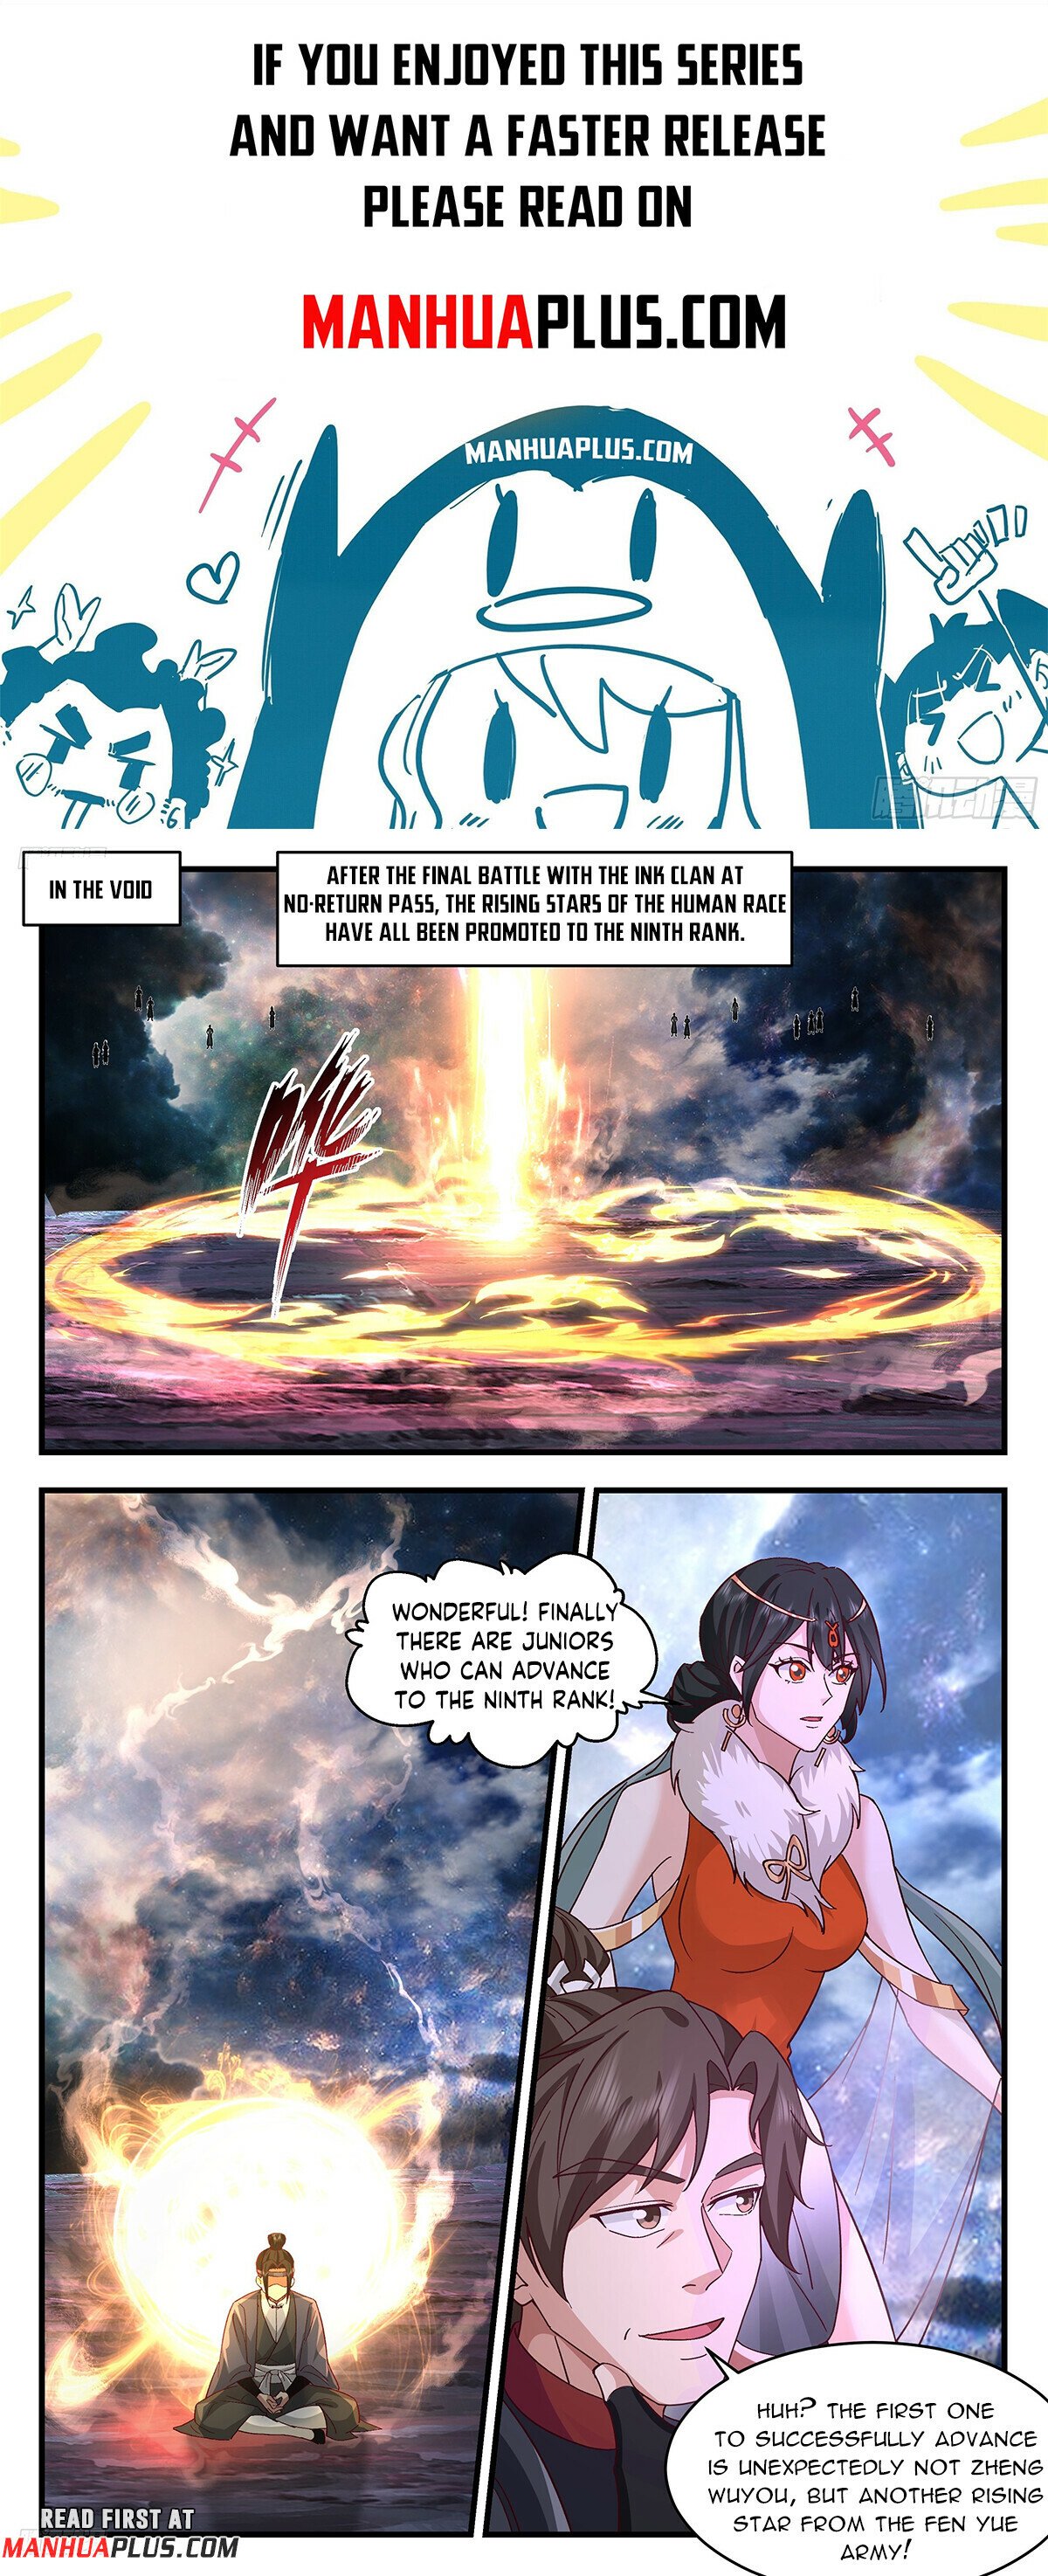 Martial Peak - Chapter 33344 - This Disciple Has Let You Down - Image 1